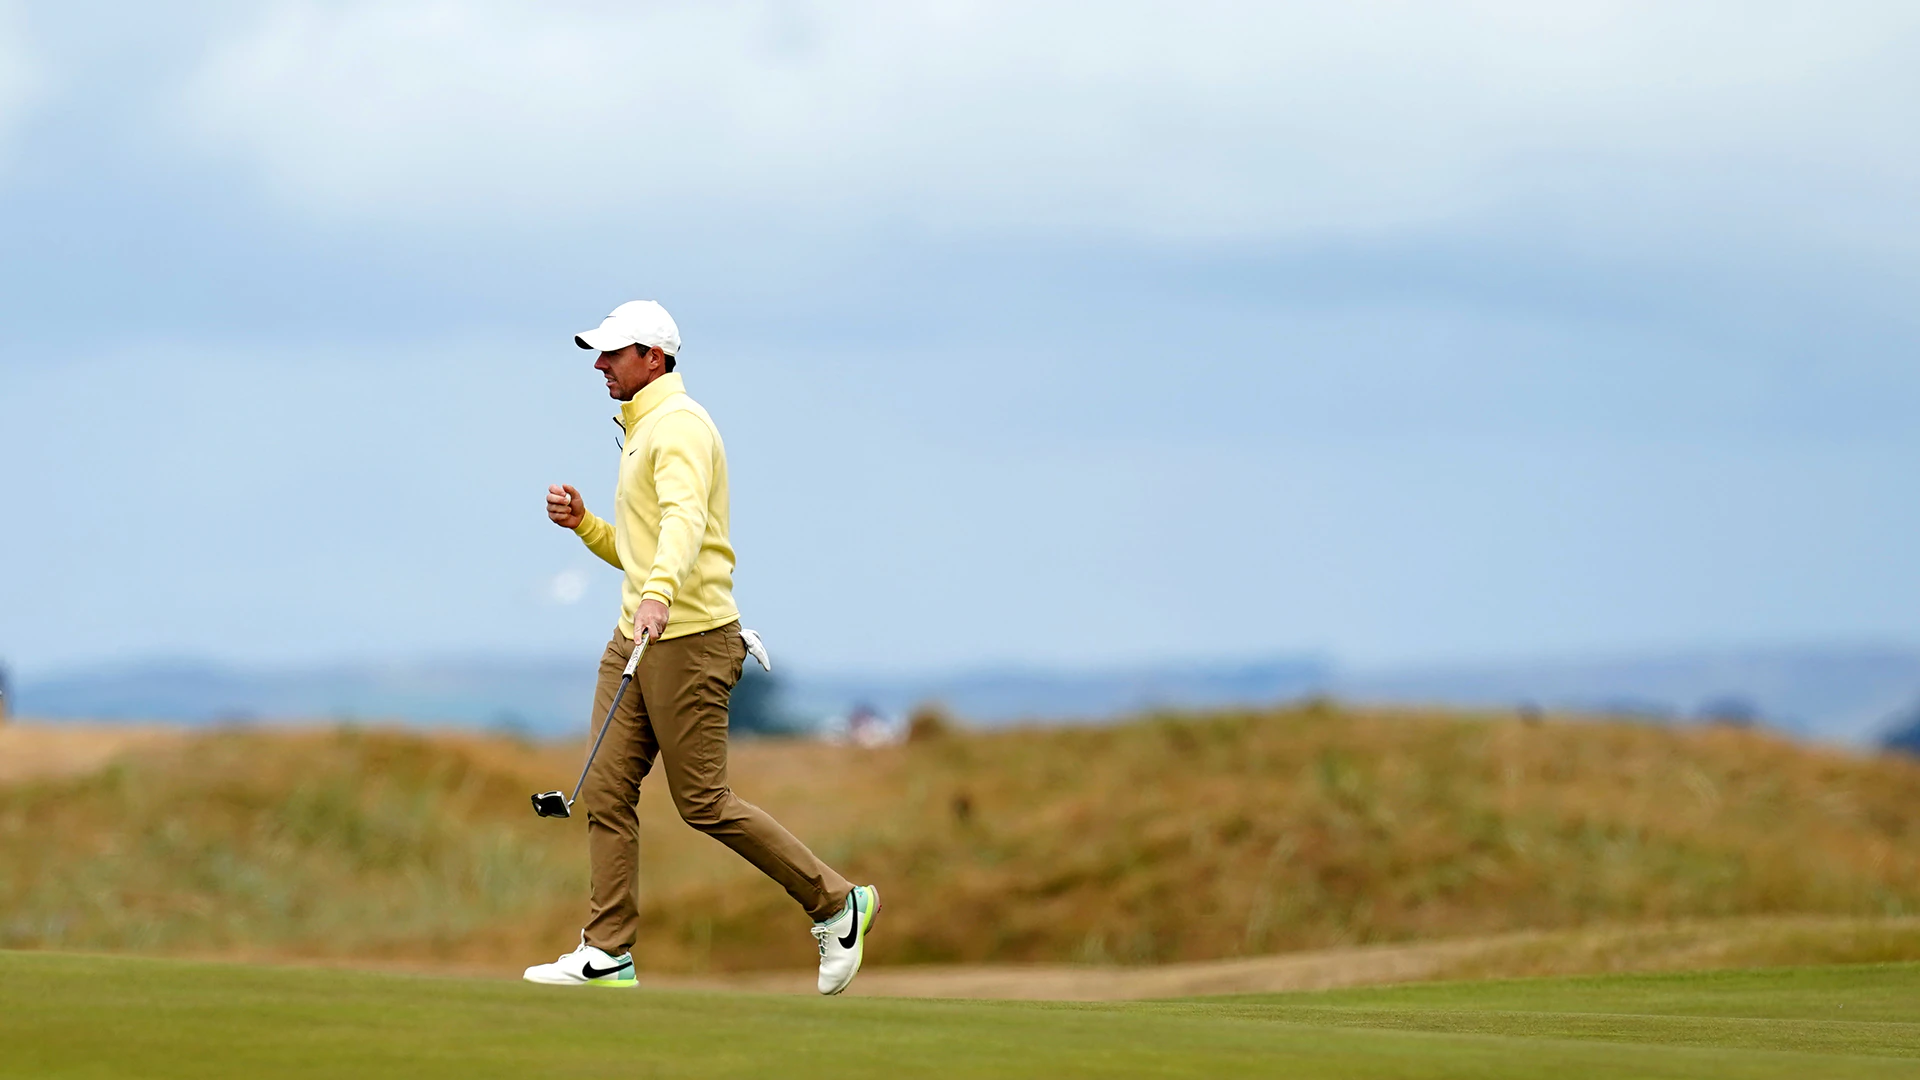 2022 British Open: Unburdened and unscathed, Rory McIlroy storms out of Open gate